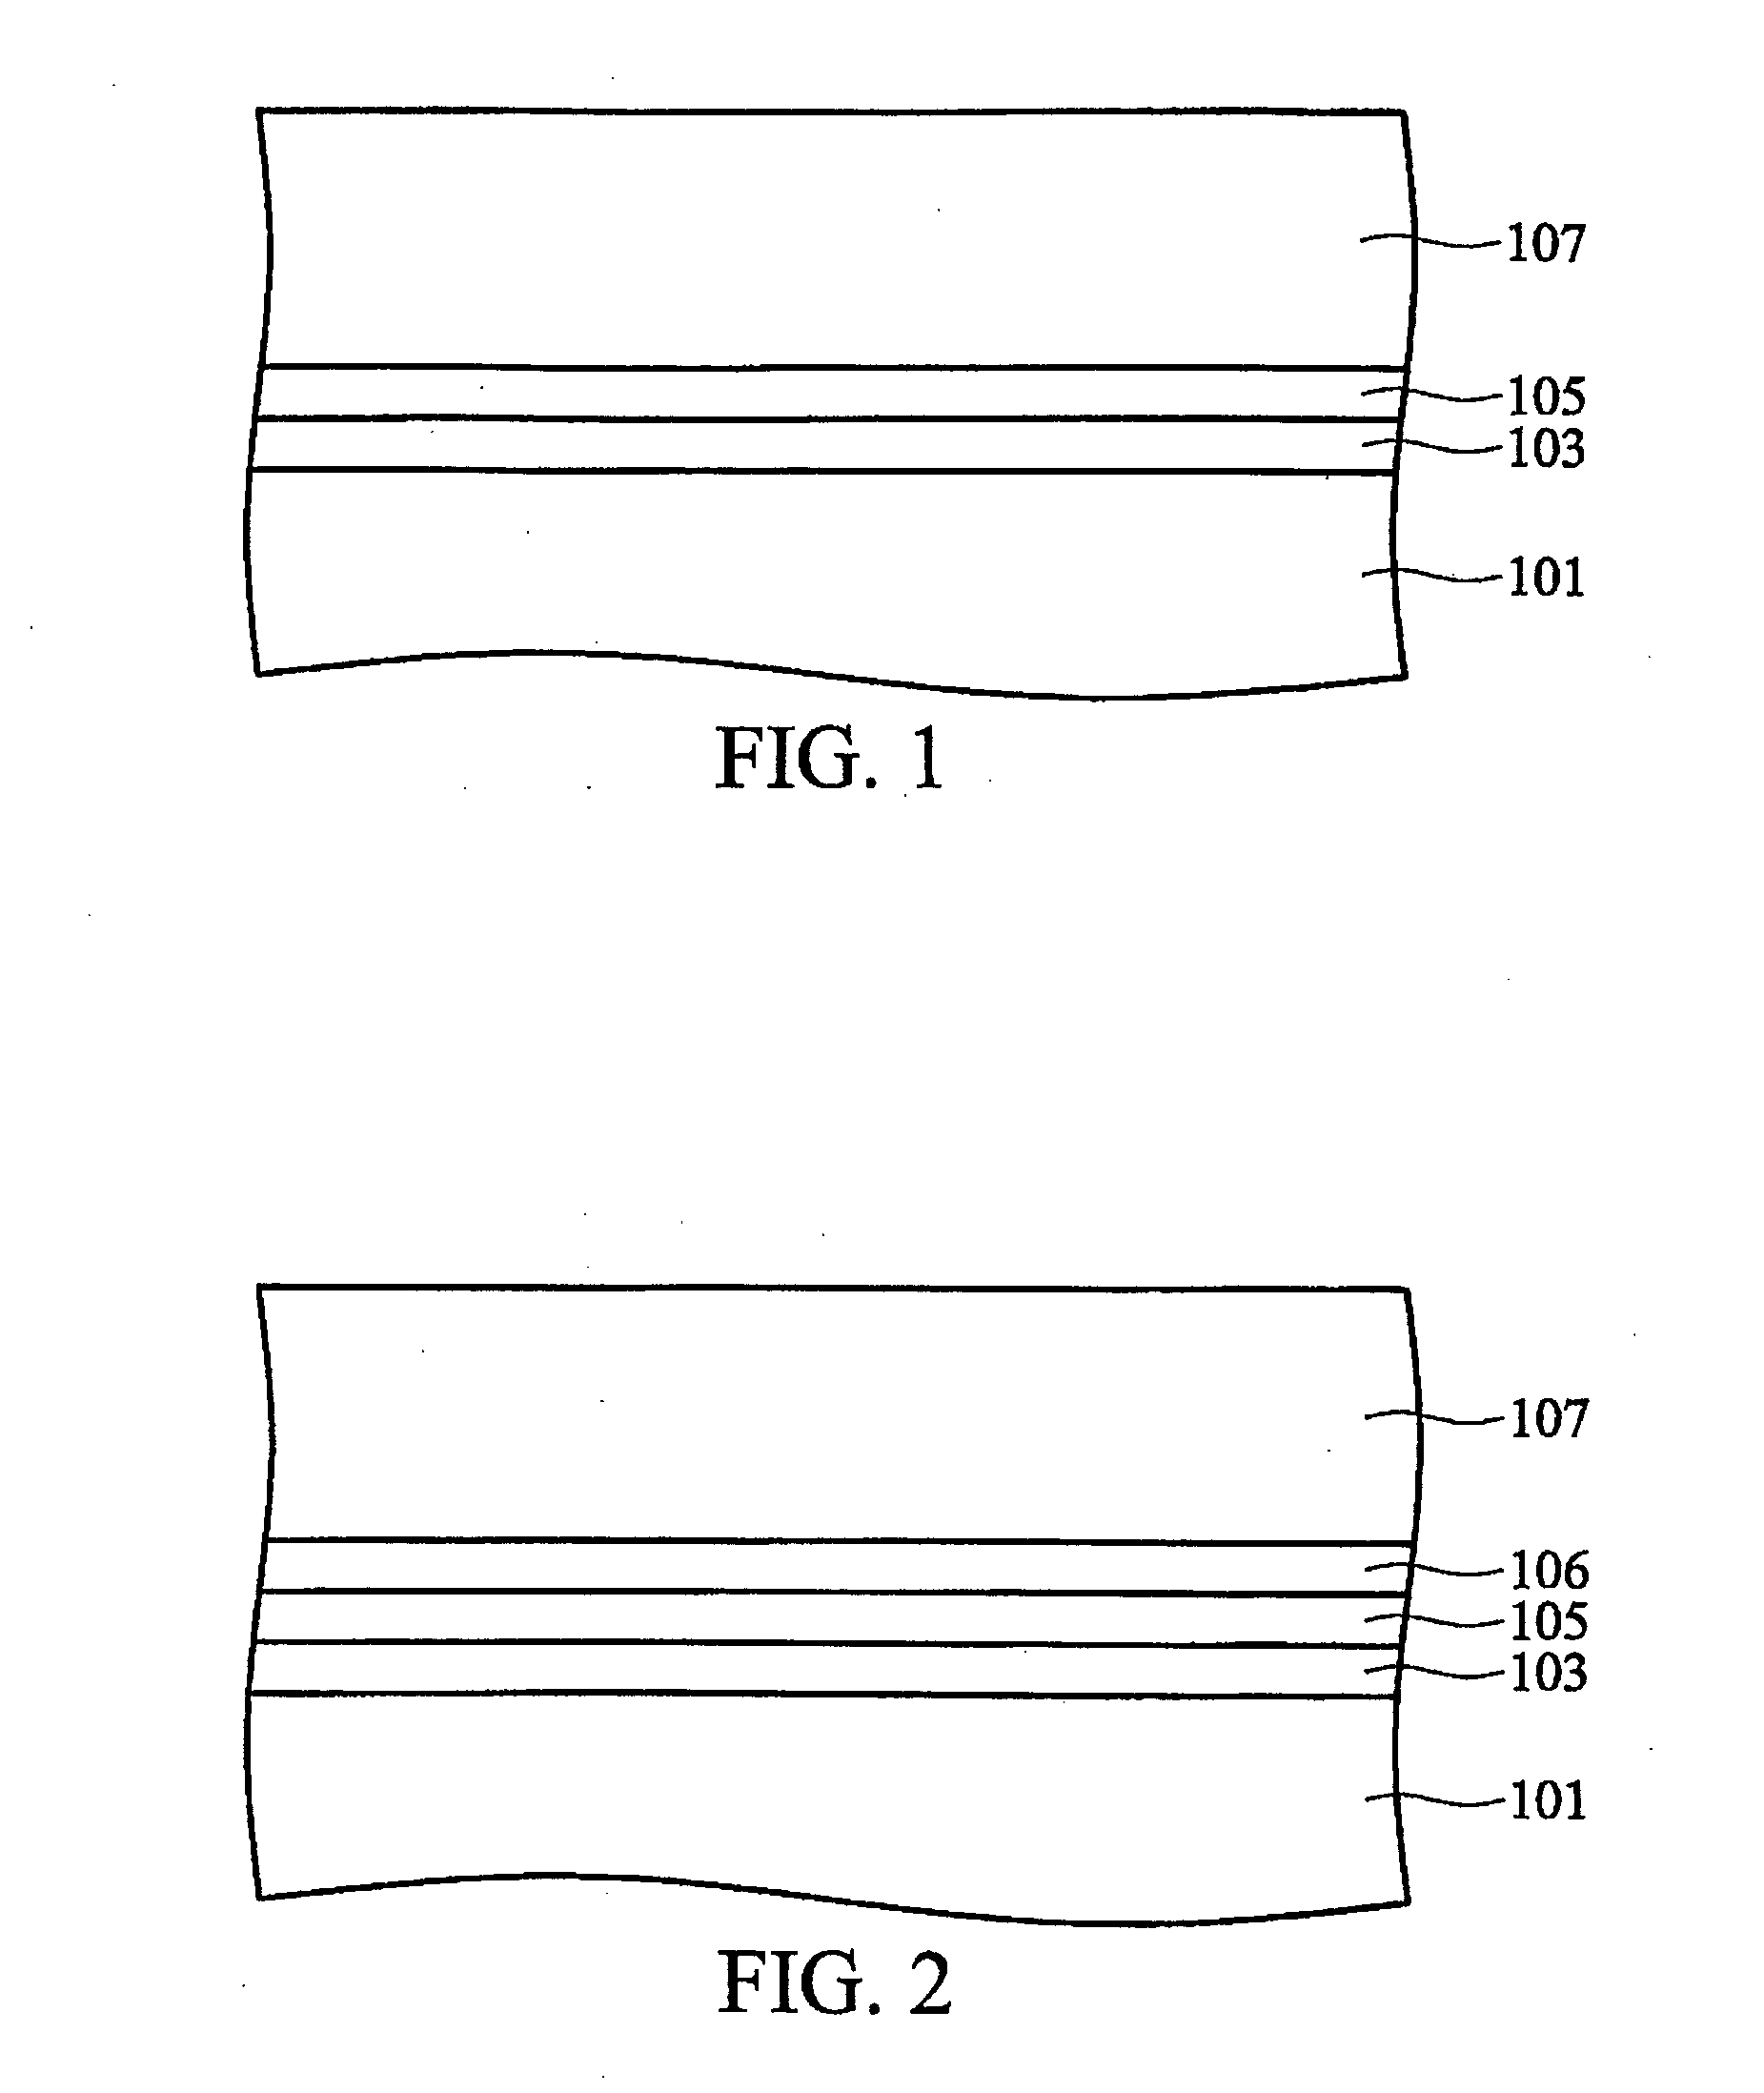 Semiconductor device and method for high-K gate dielectrics